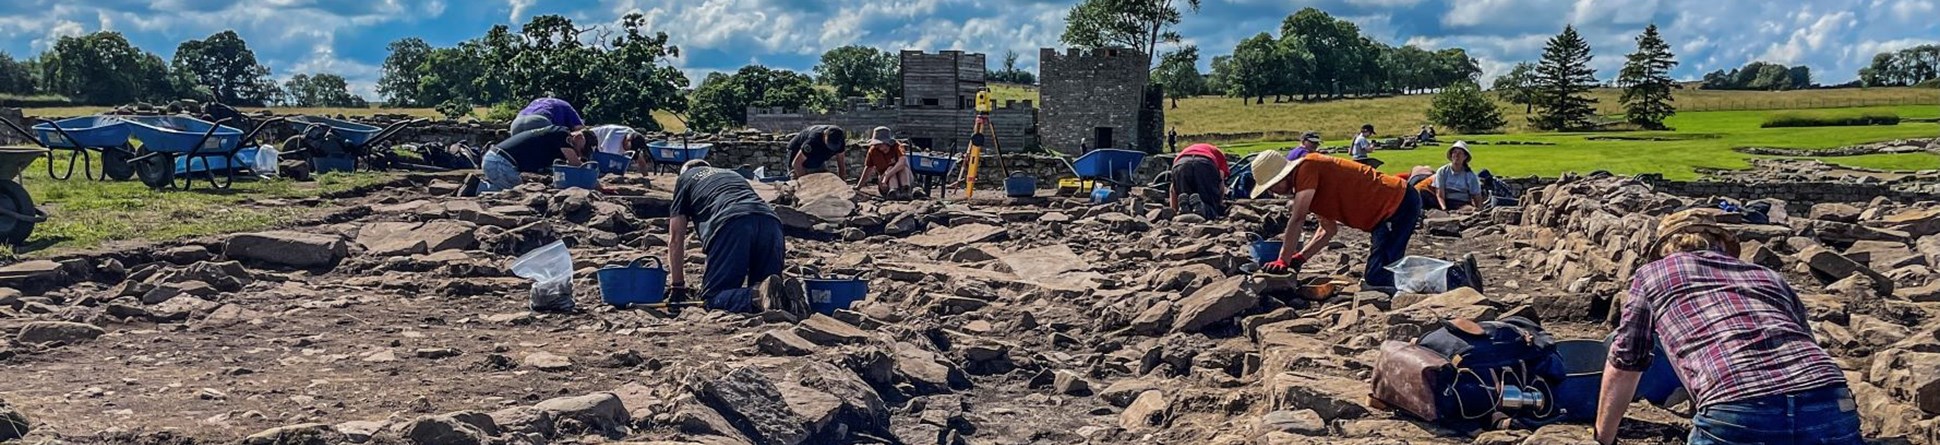 People on their knees digging at an archaeological site.